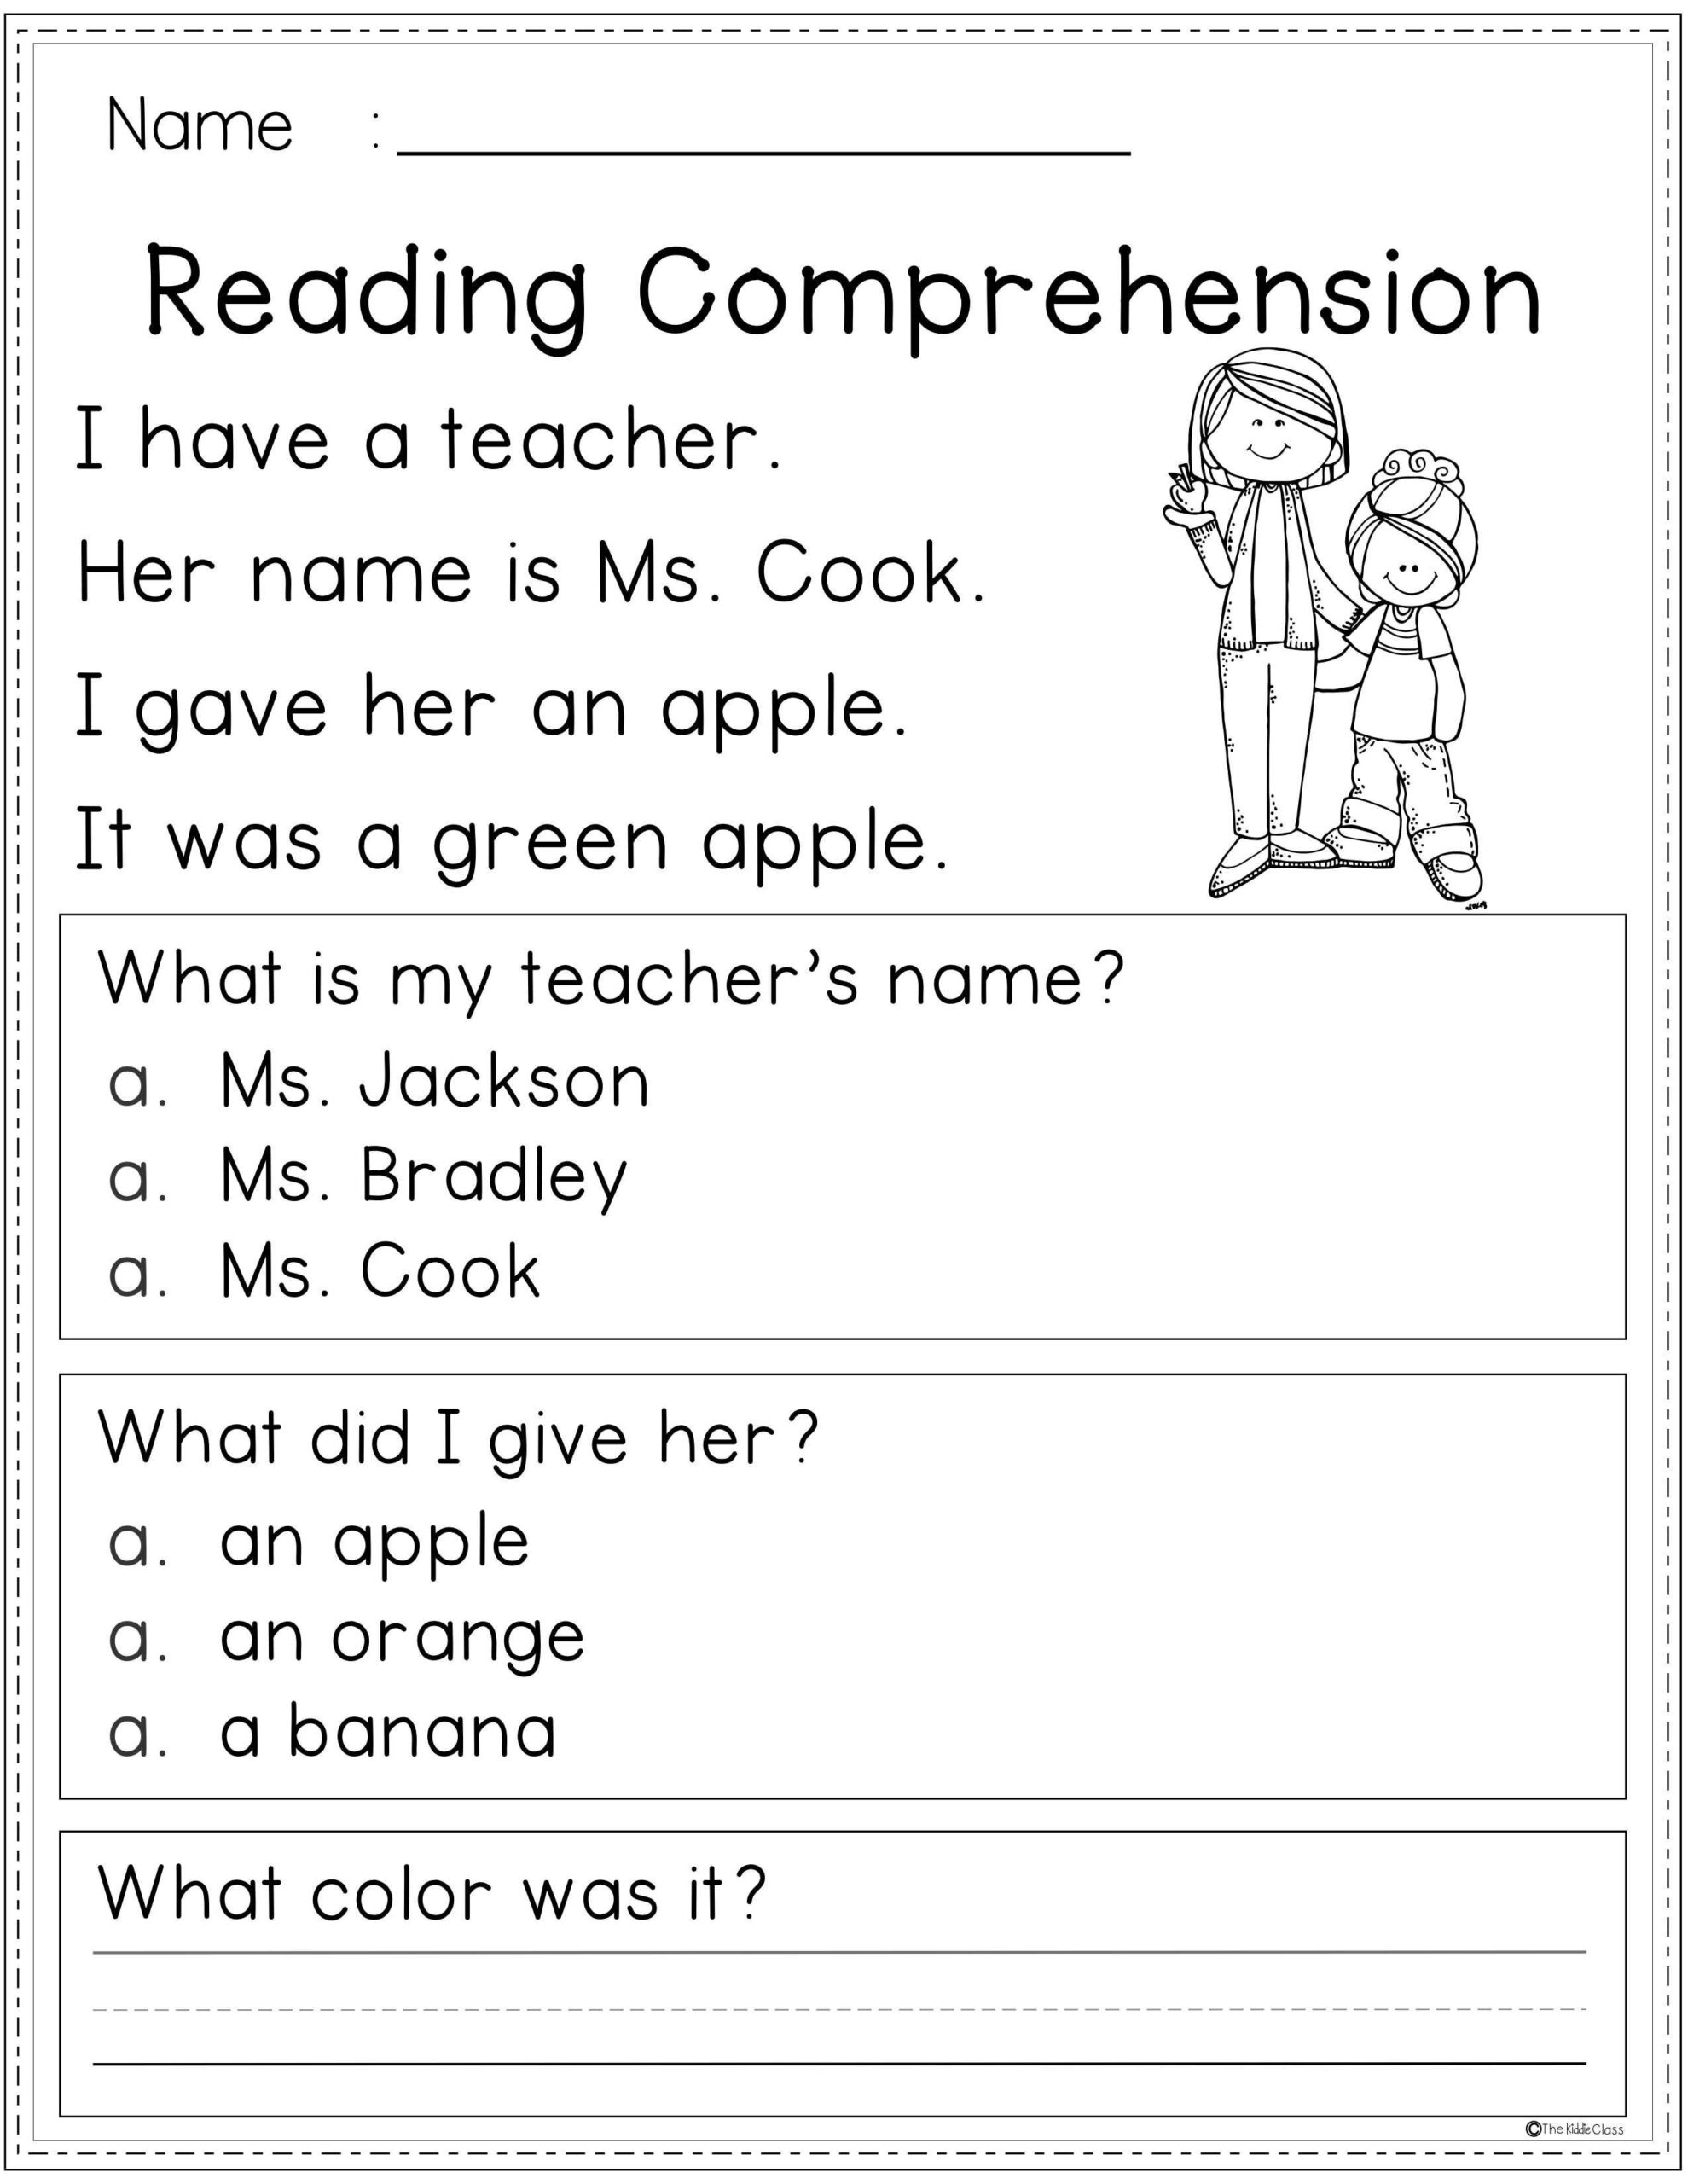 free-printable-reading-comprehension-worksheets-for-5th-grade